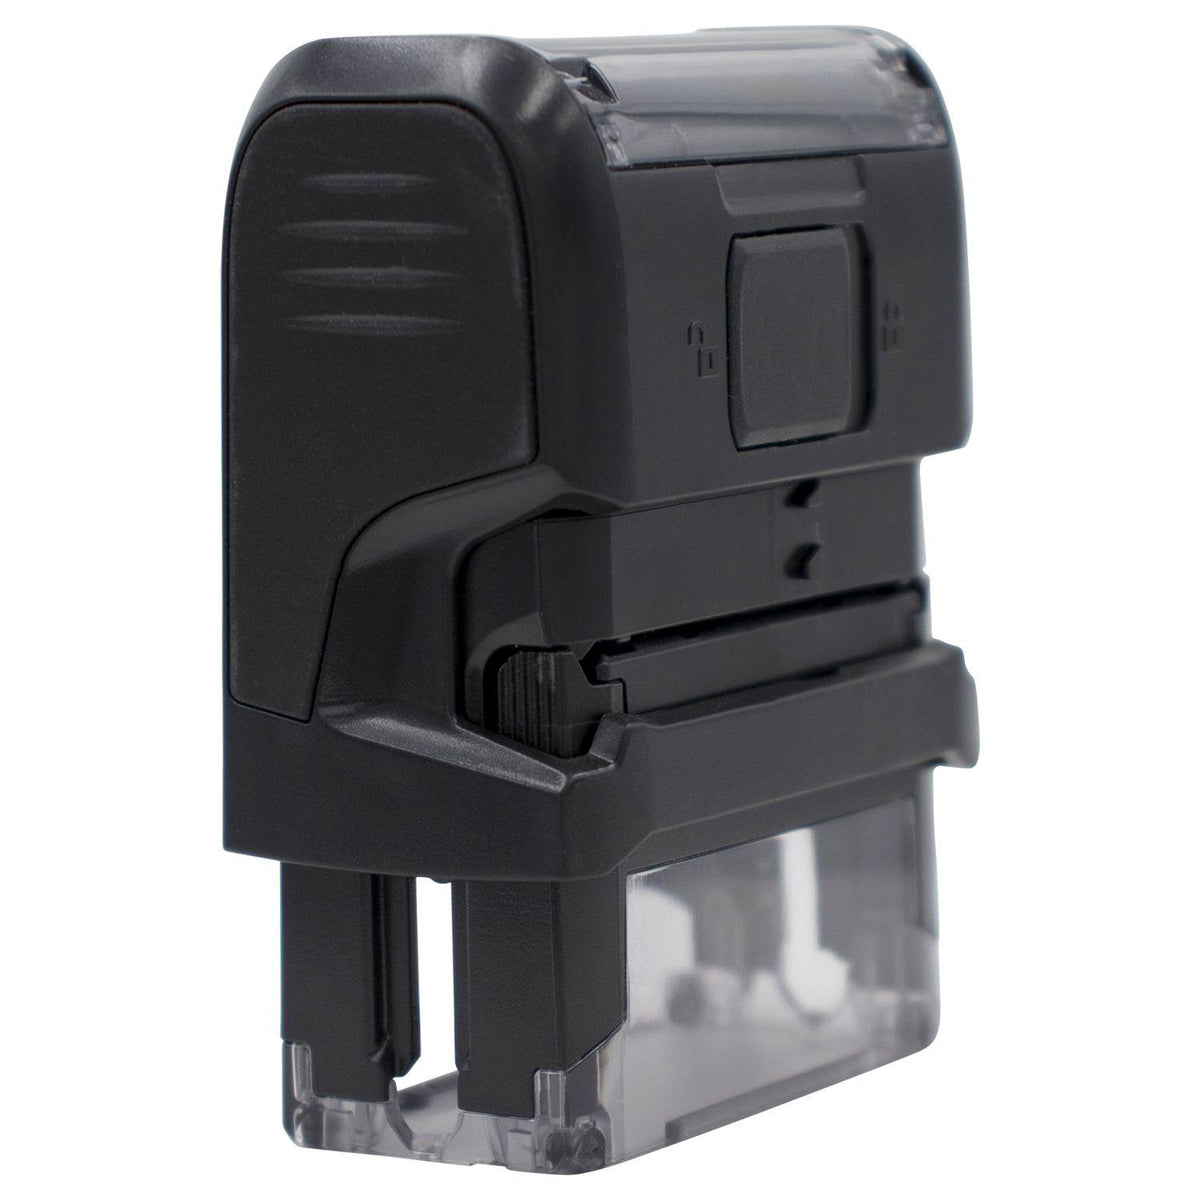 Large Self-Inking E-Mail Stamp - Engineer Seal Stamps - Brand_Trodat, Impression Size_Large, Stamp Type_Self-Inking Stamp, Type of Use_General, Type of Use_Office